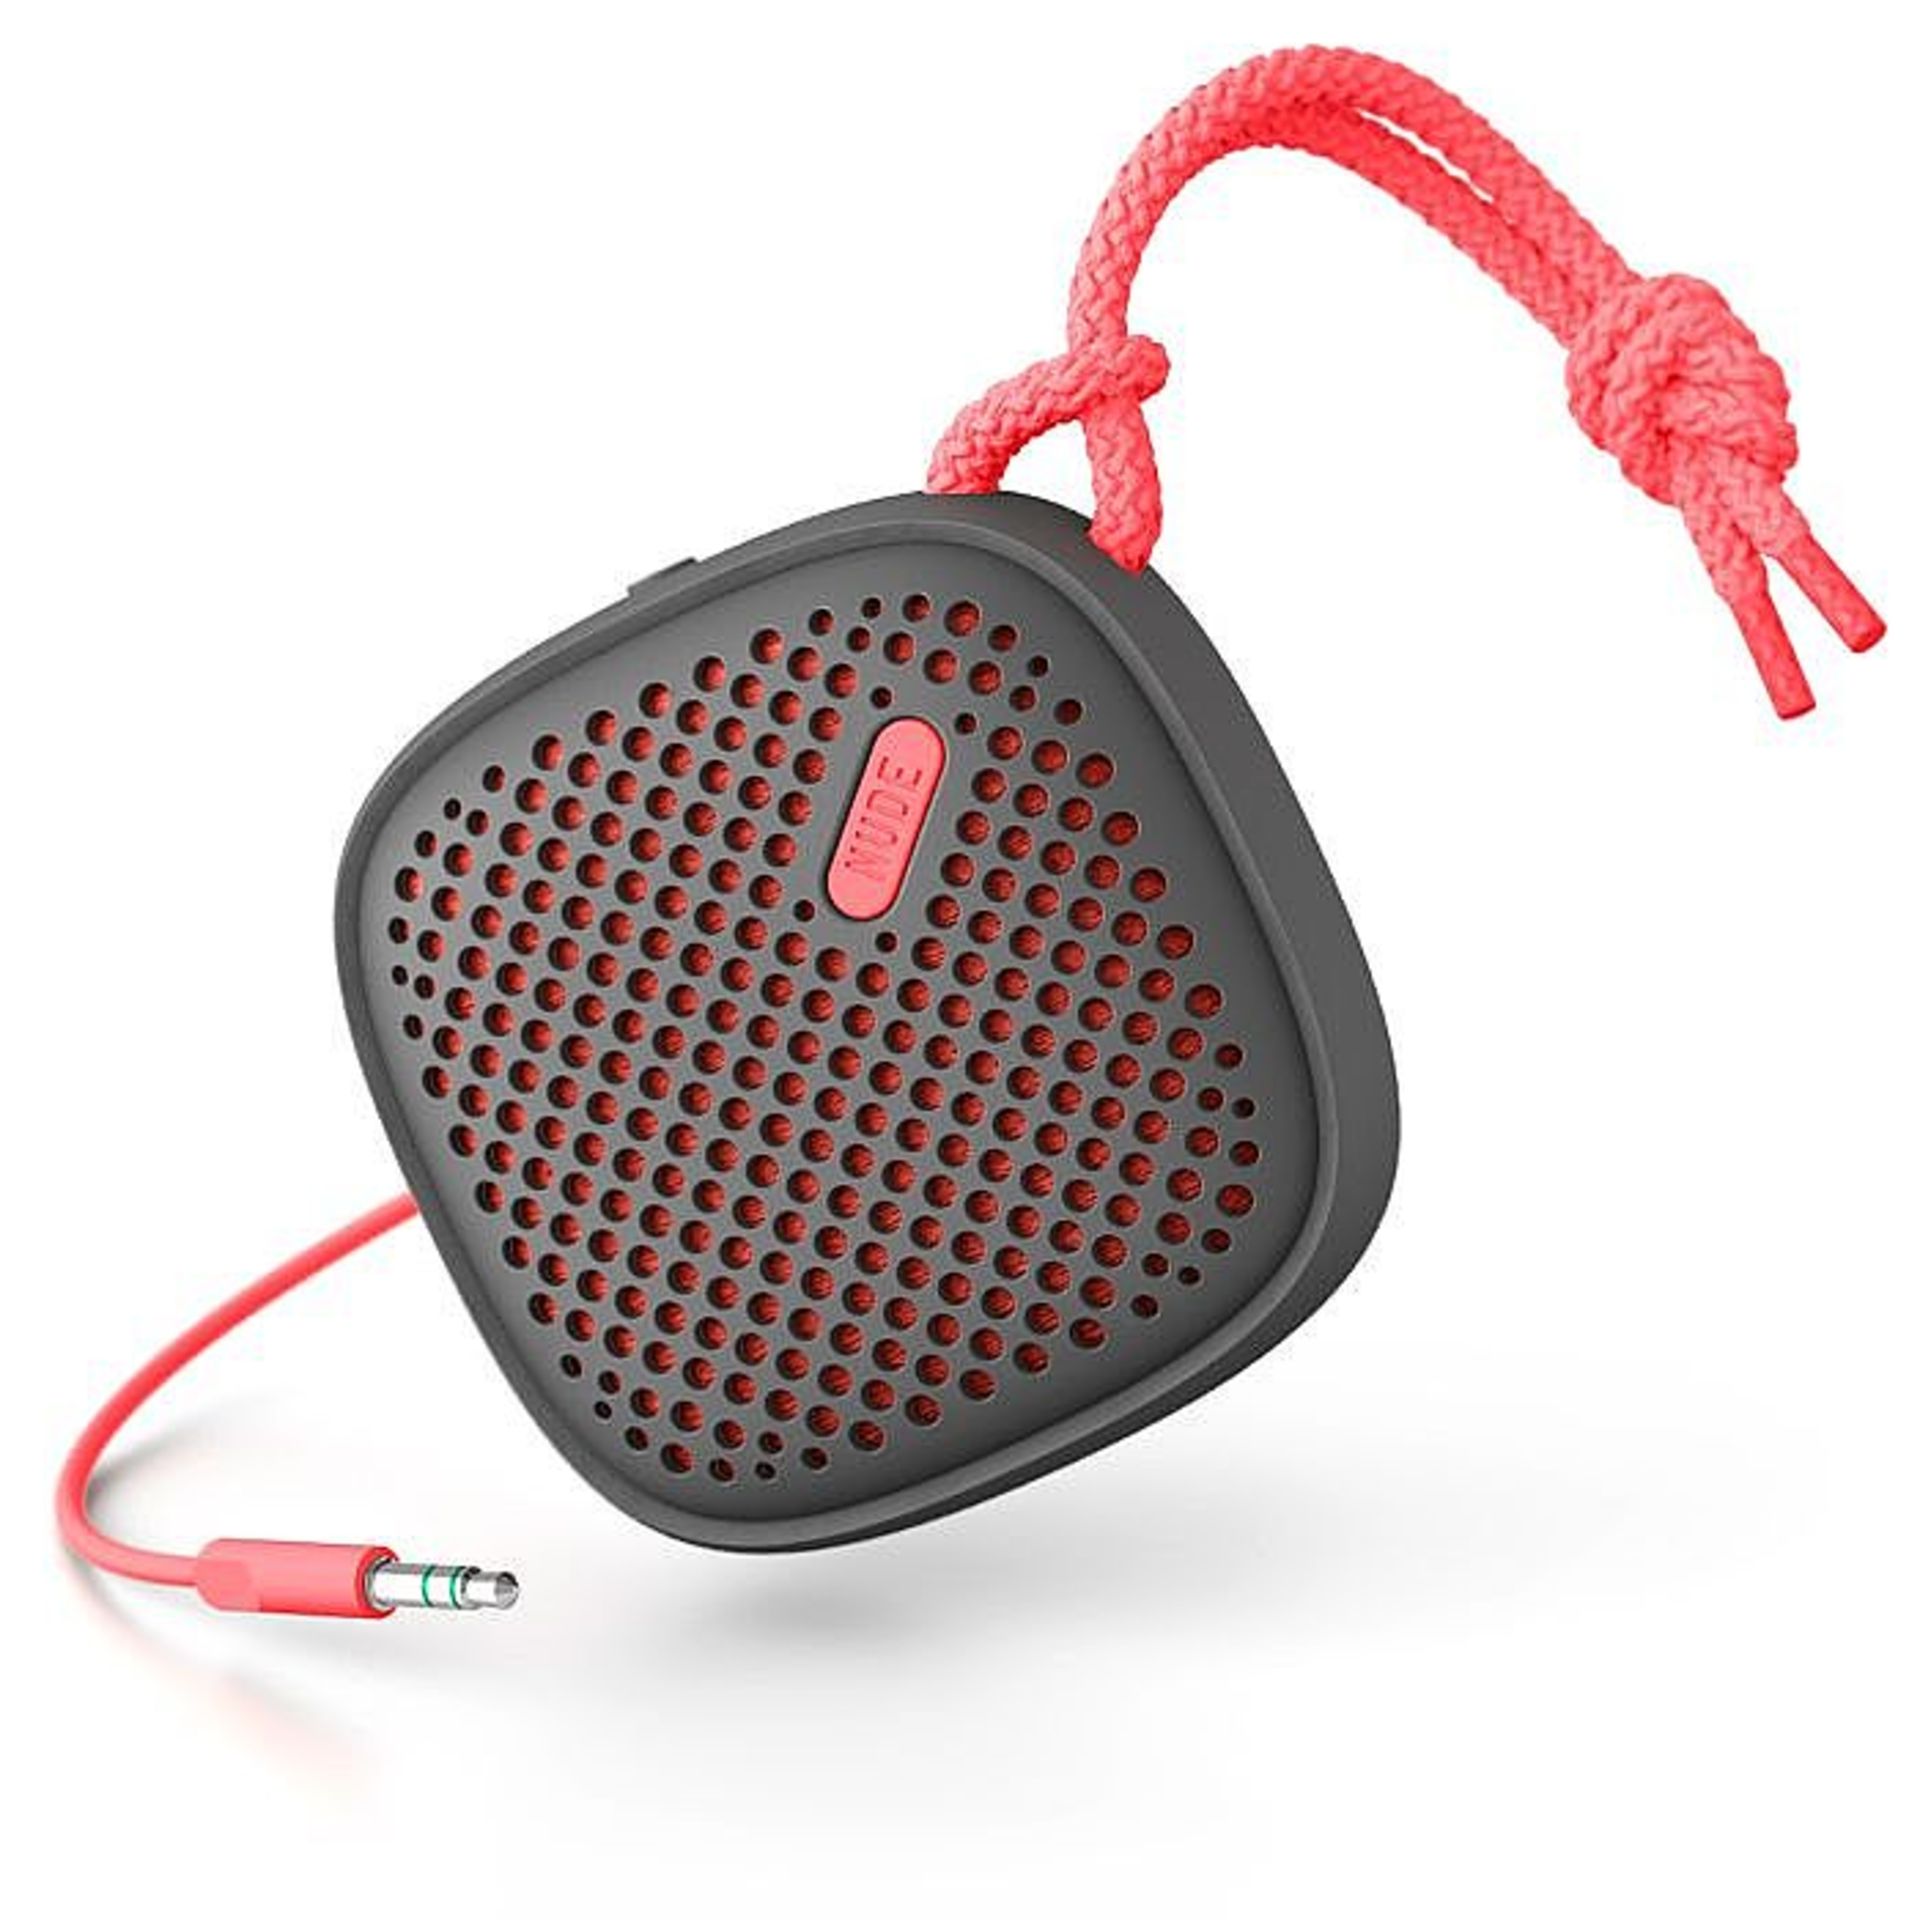 V *TRADE QTY* Brand New Nude Audio Move S Wired Portable Speaker - Coral X 4 YOUR BID PRICE TO BE